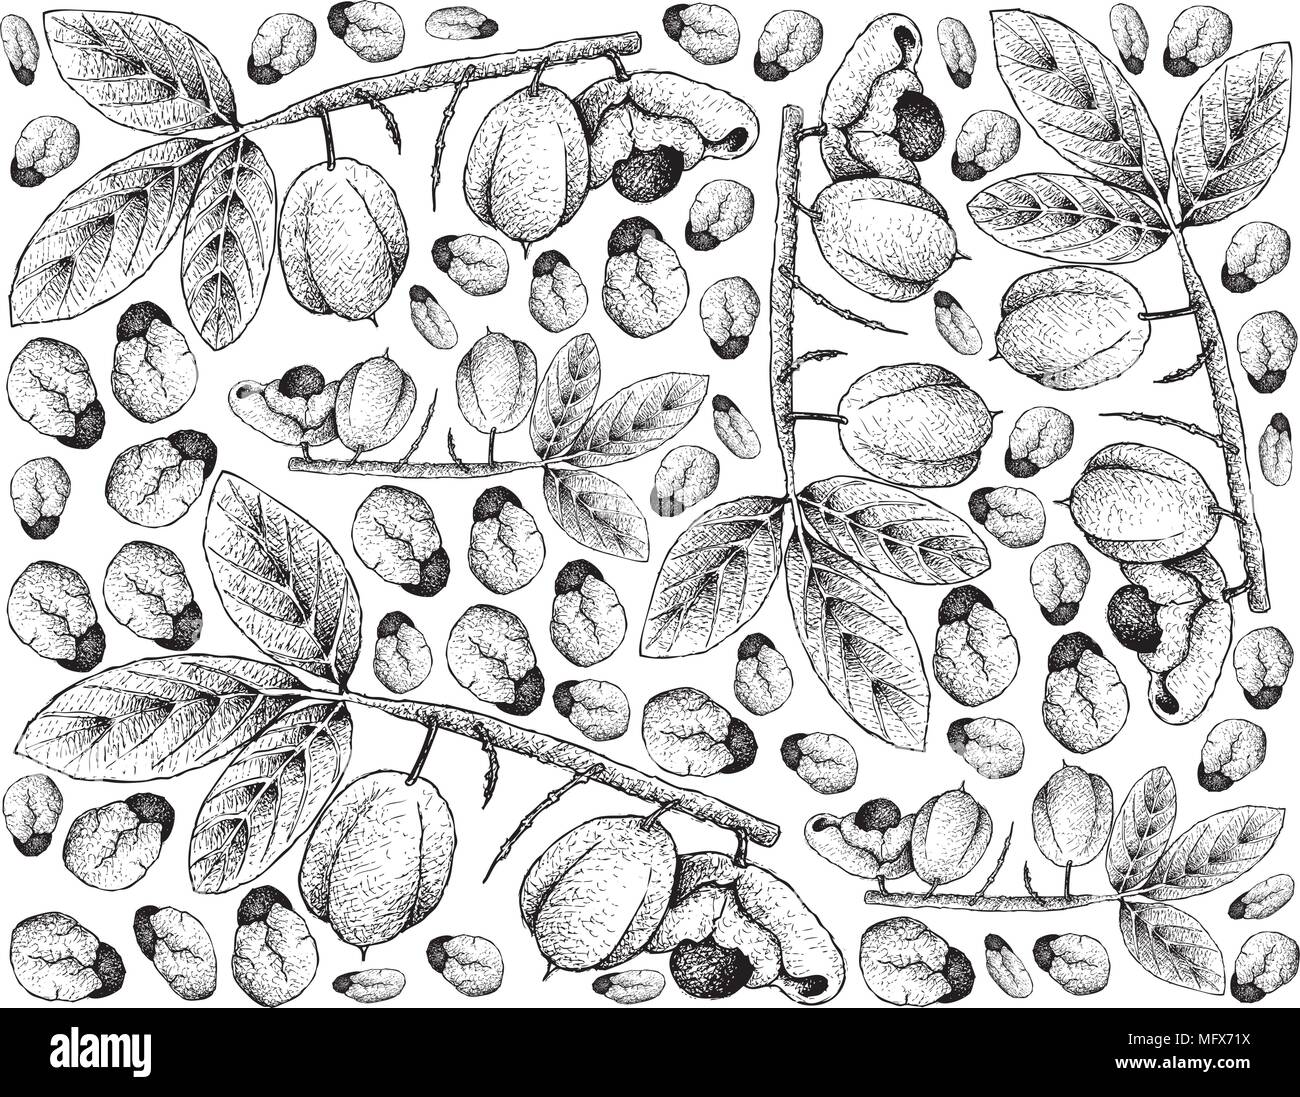 Tropical Fruits, Illustration Wallpaper Background of Hand Drawn Sketch of Ackee or Blighia Sapida Fruits. High in Vitamin A and C With Essential Nutr Stock Vector